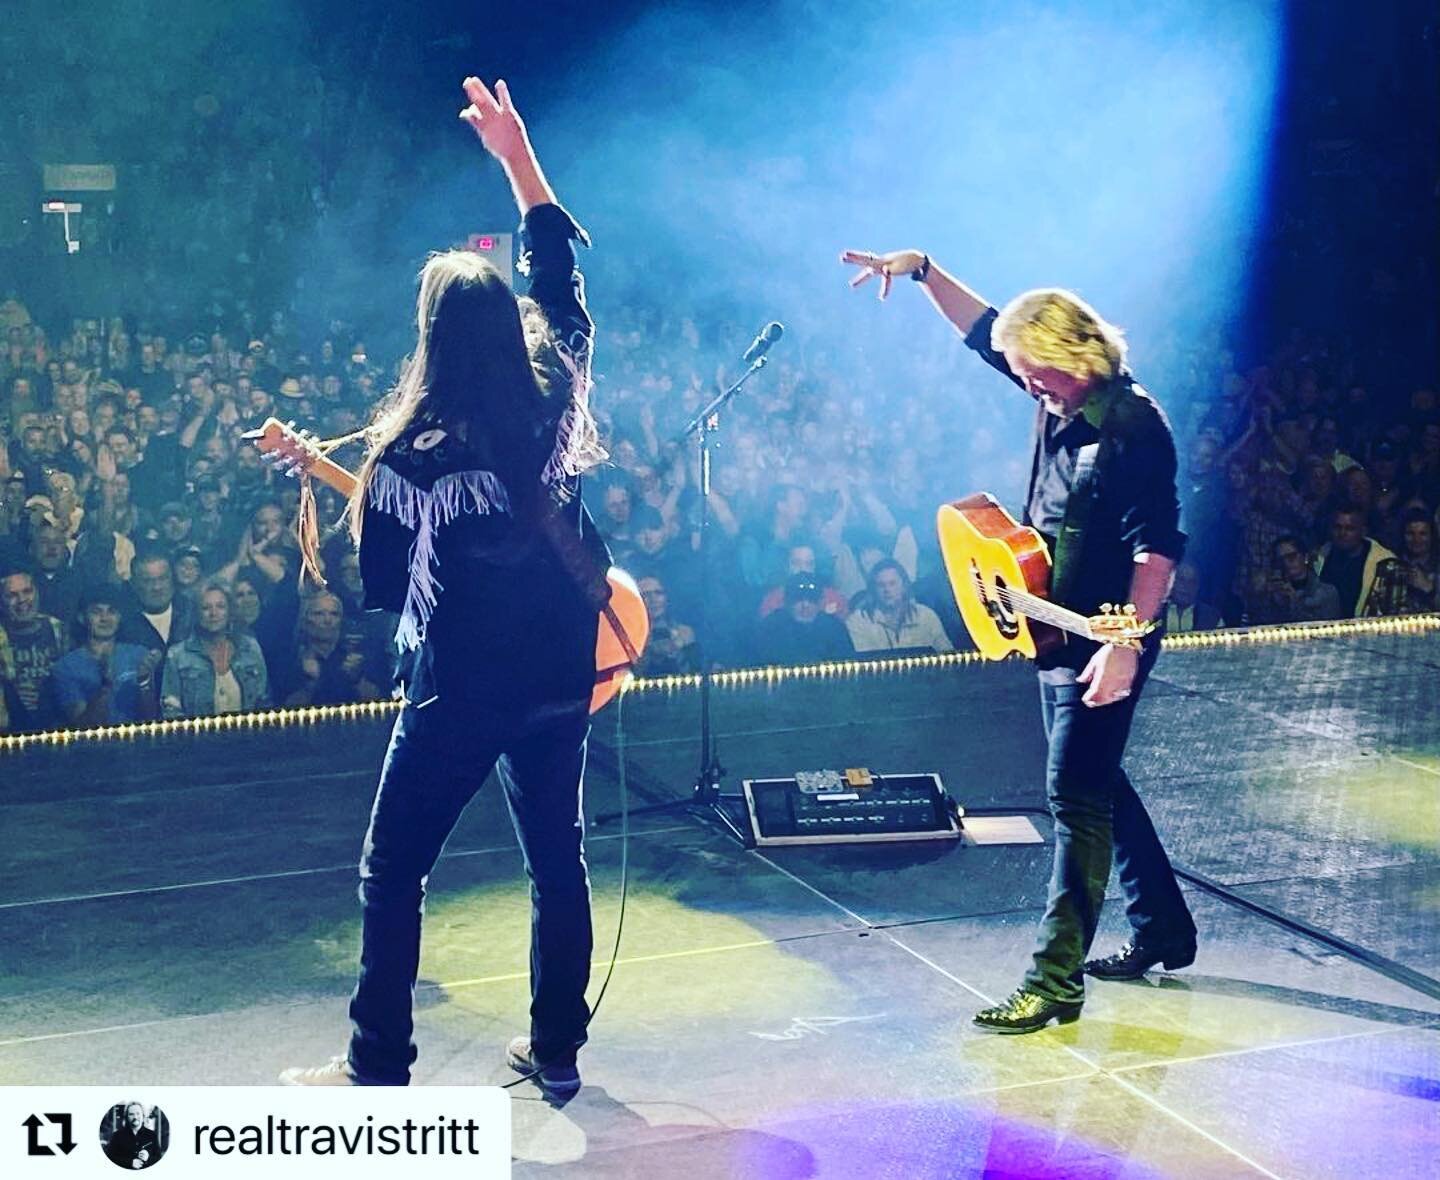 Ding dang!  Loving playing all these towns across America with the great @realtravistritt #travistritt #jammingacrossamerica